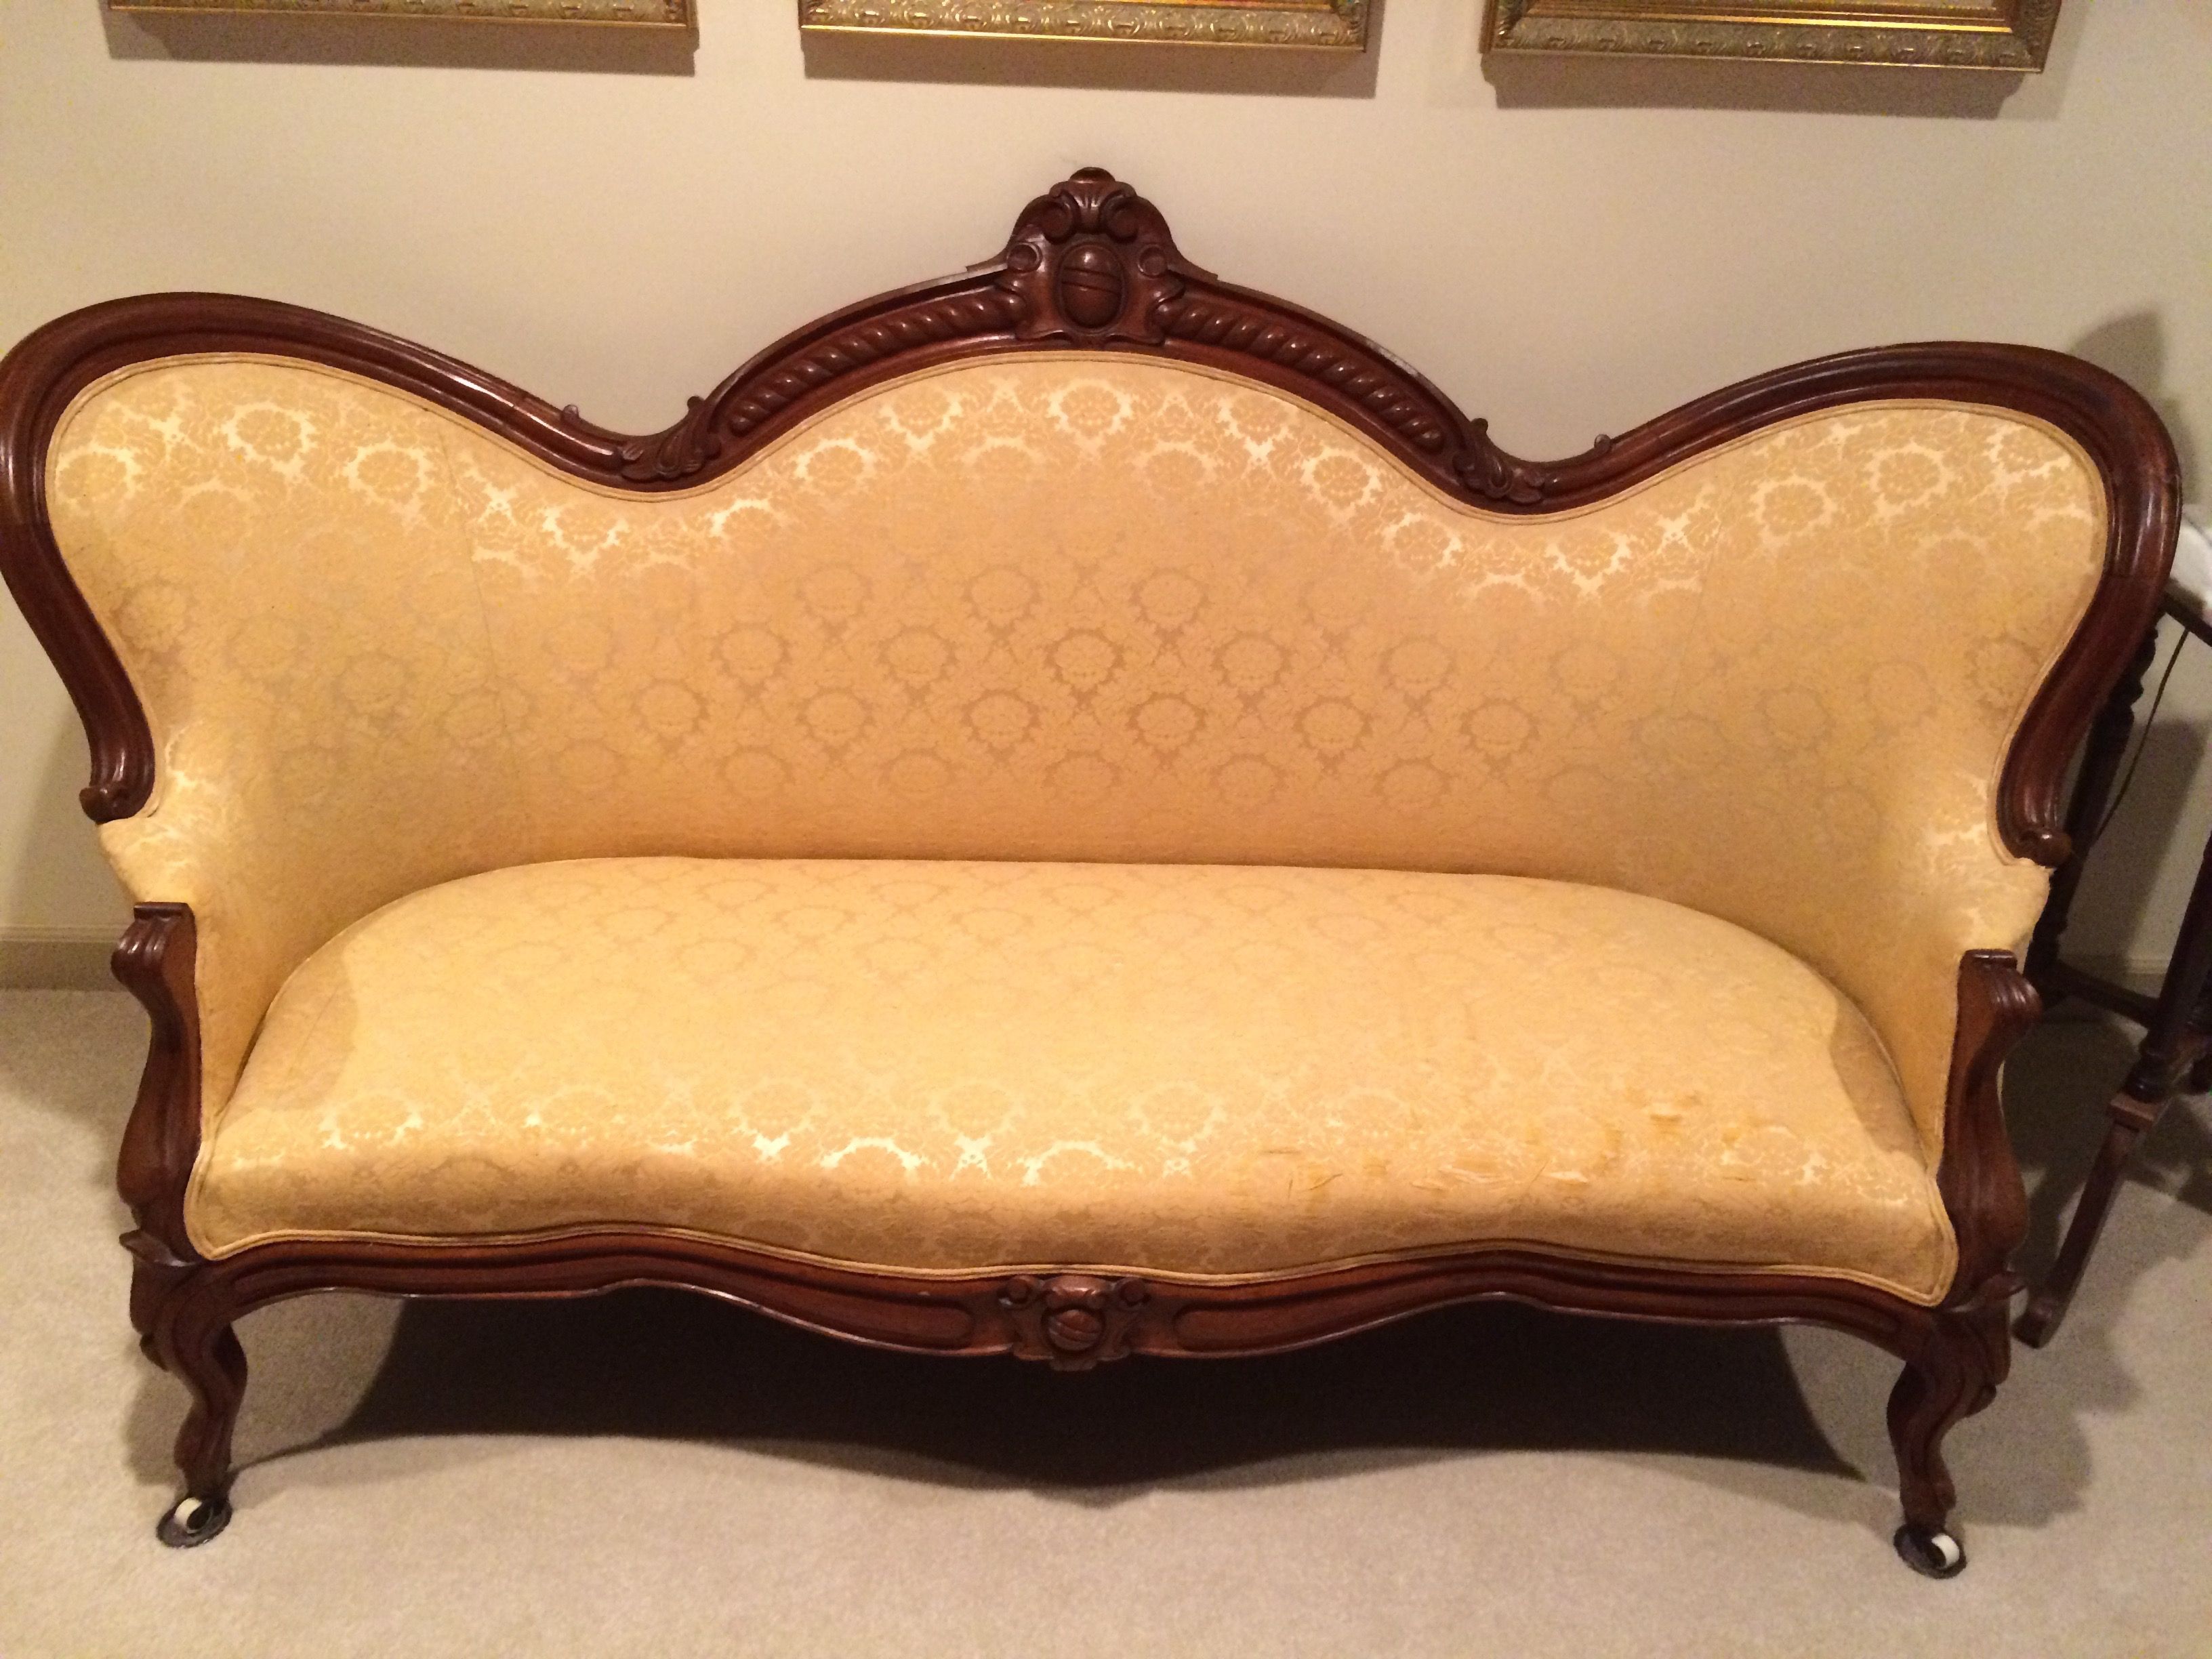 Preferred Antique Sofa, Arm Chair And Nursing Chair For Sale (View 3 of 20)